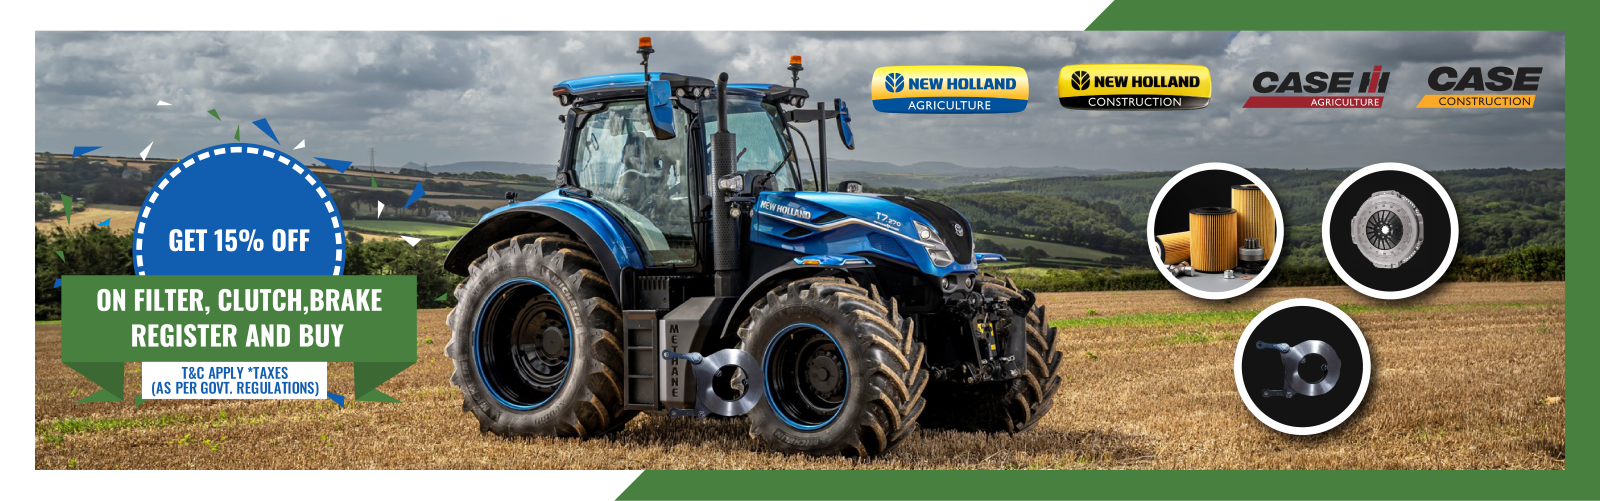 Discount on New Holland Clutch, Brake, and Filters - Register Now!